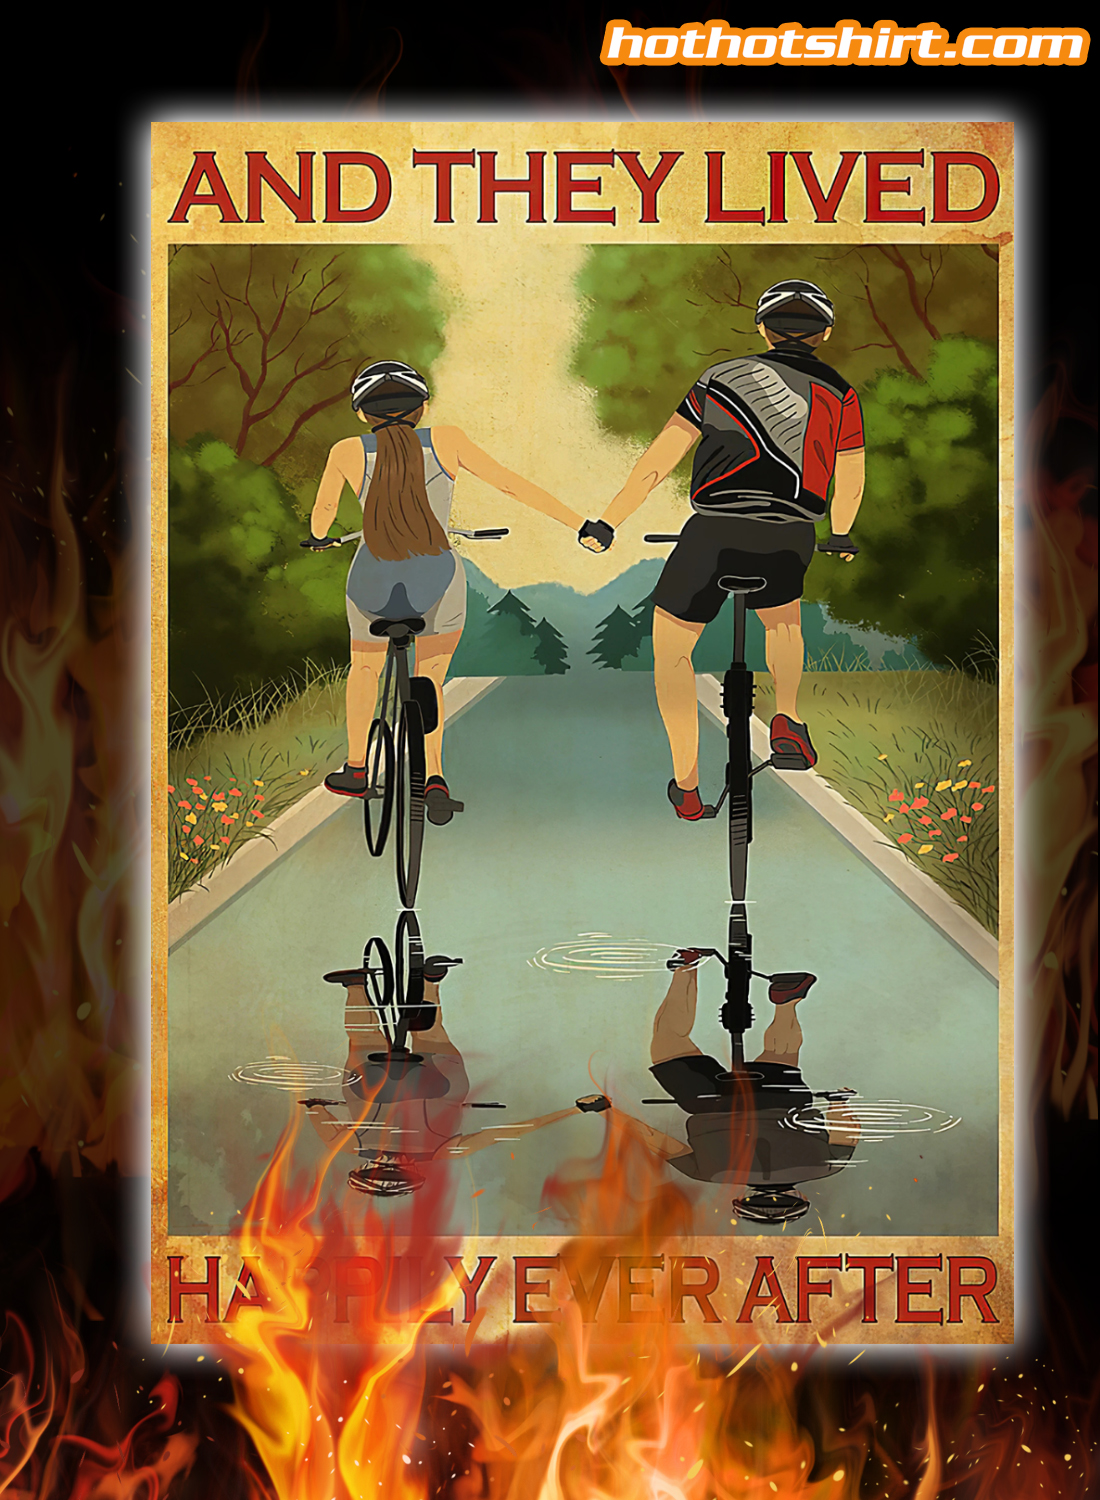 Husband And Wife Cycling And They Lived Happily Ever After Poster